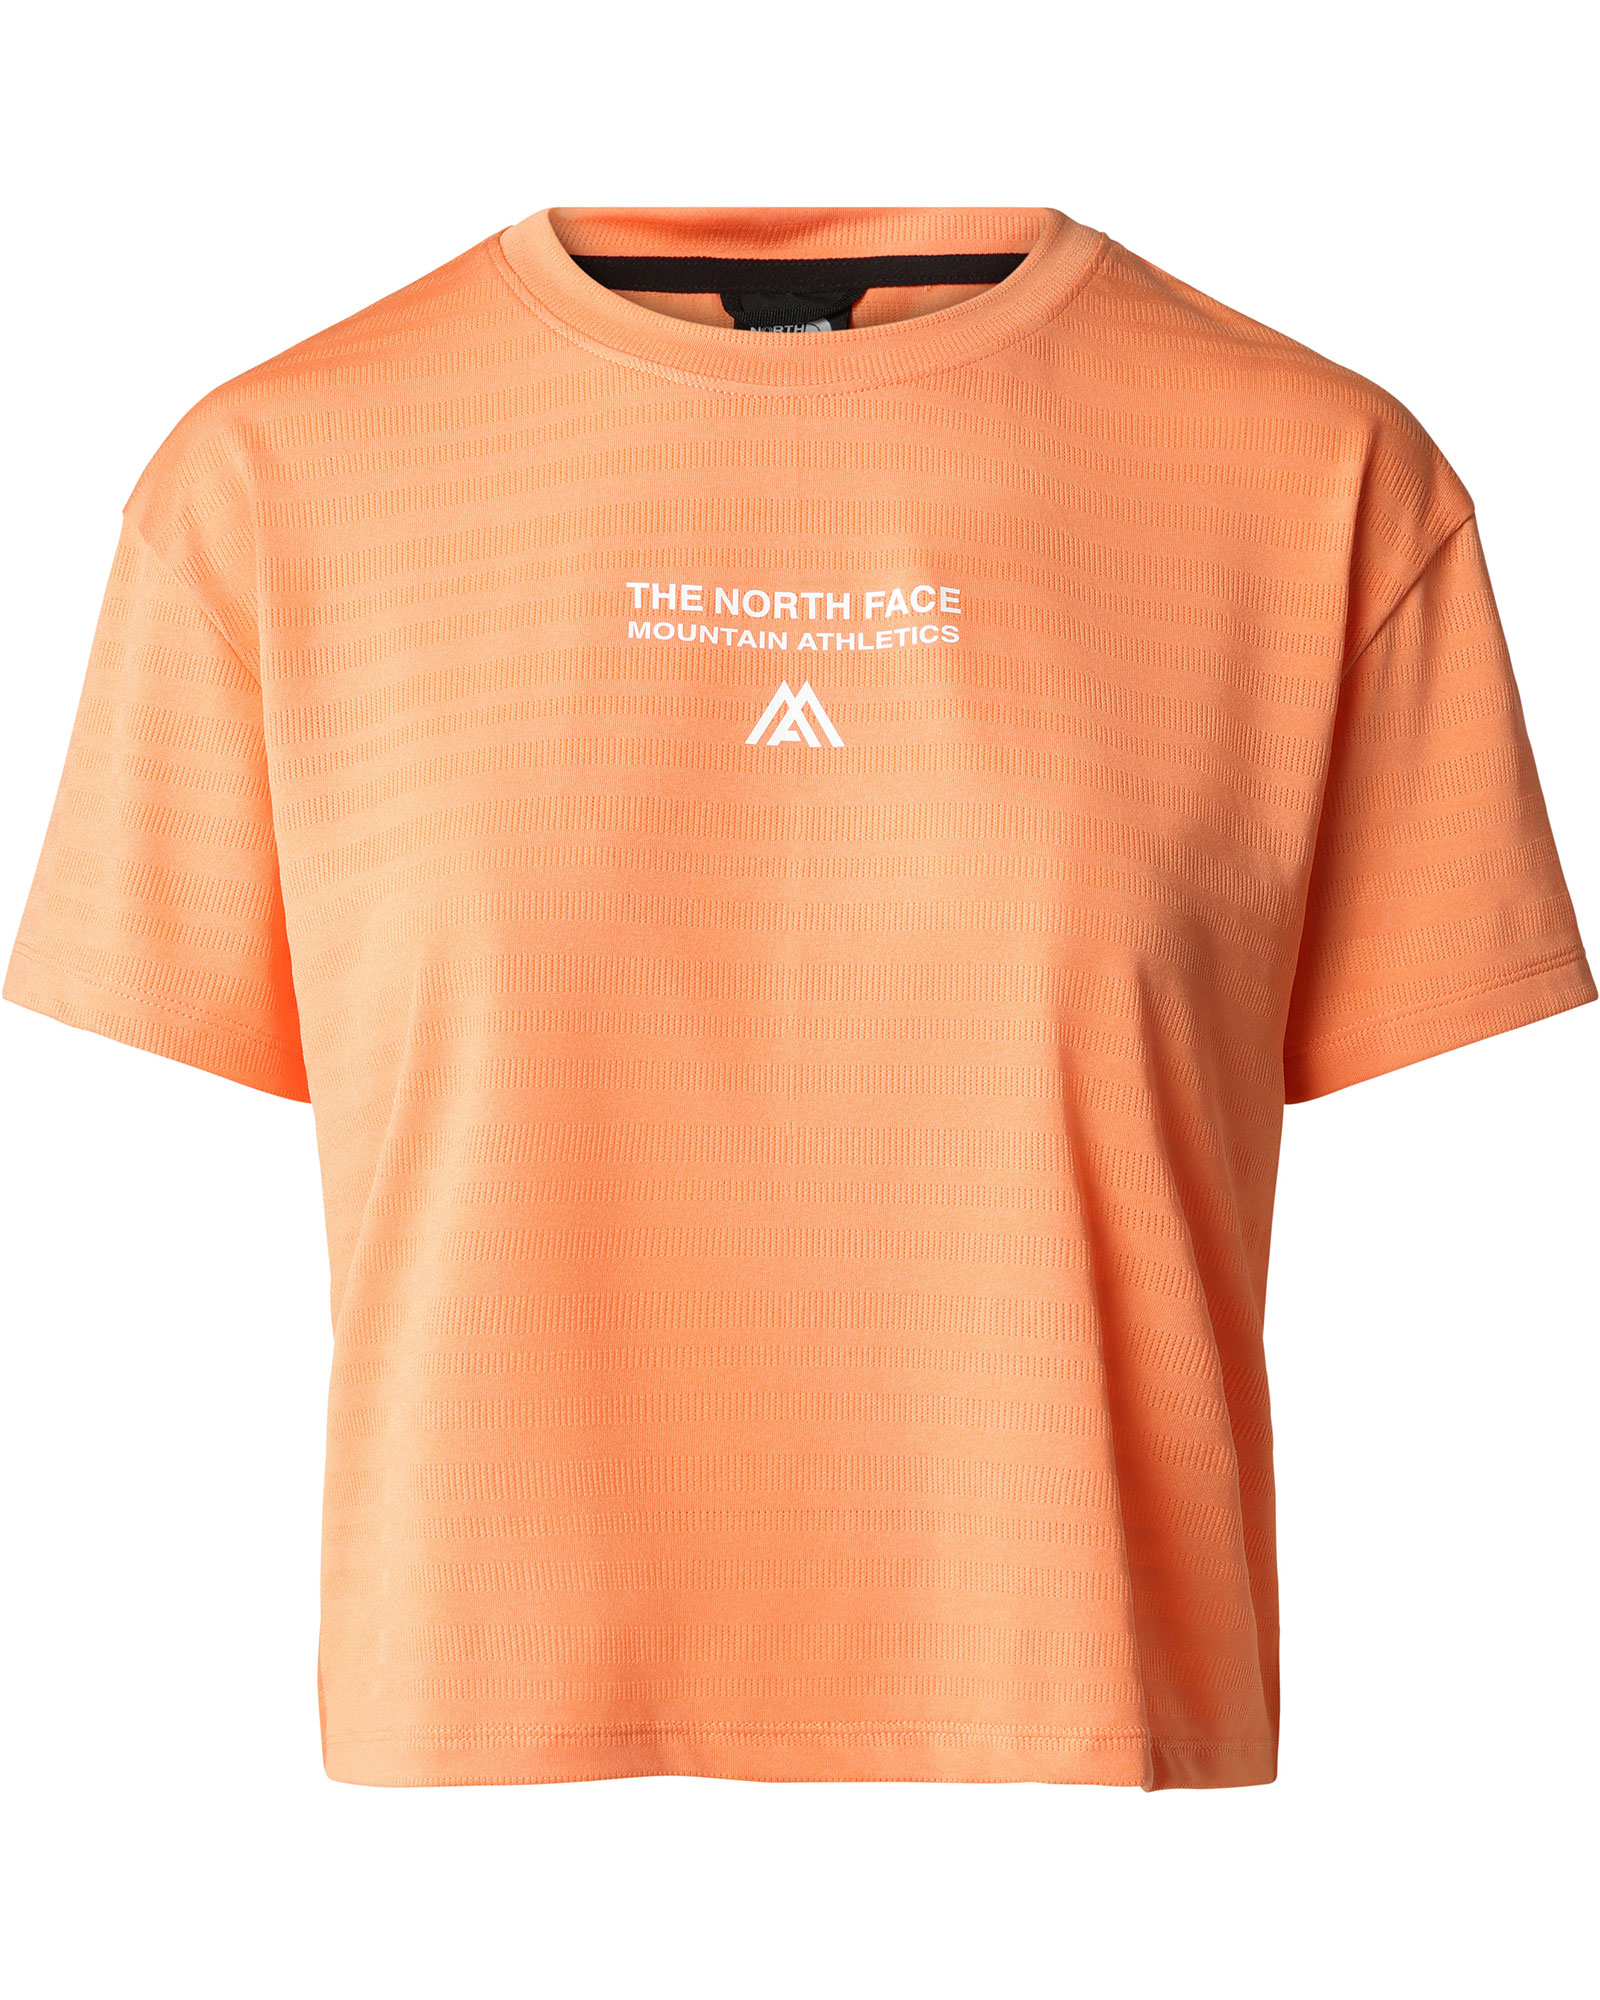 The North Face Women’s MA T Shirt - Dusty Coral Orange S